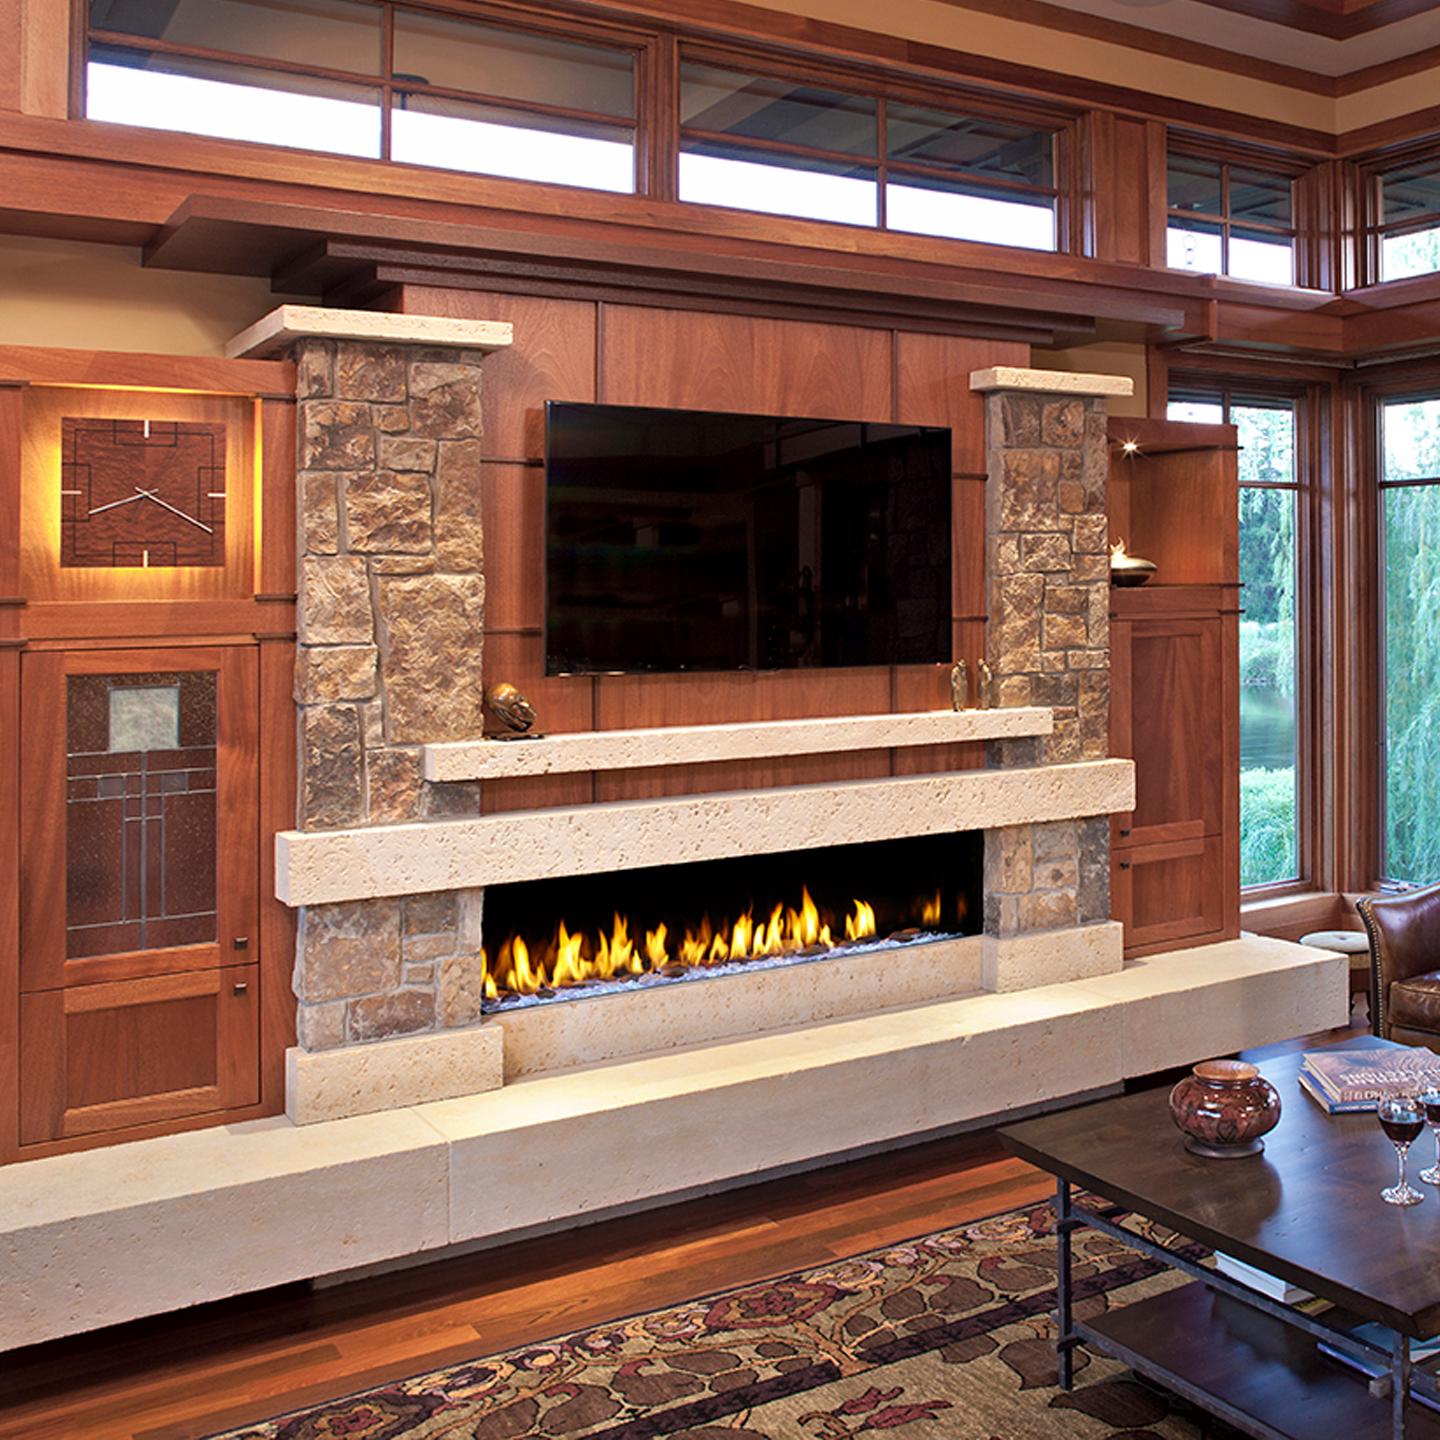 Heat & Glo Direct Vent Gas Fireplaces